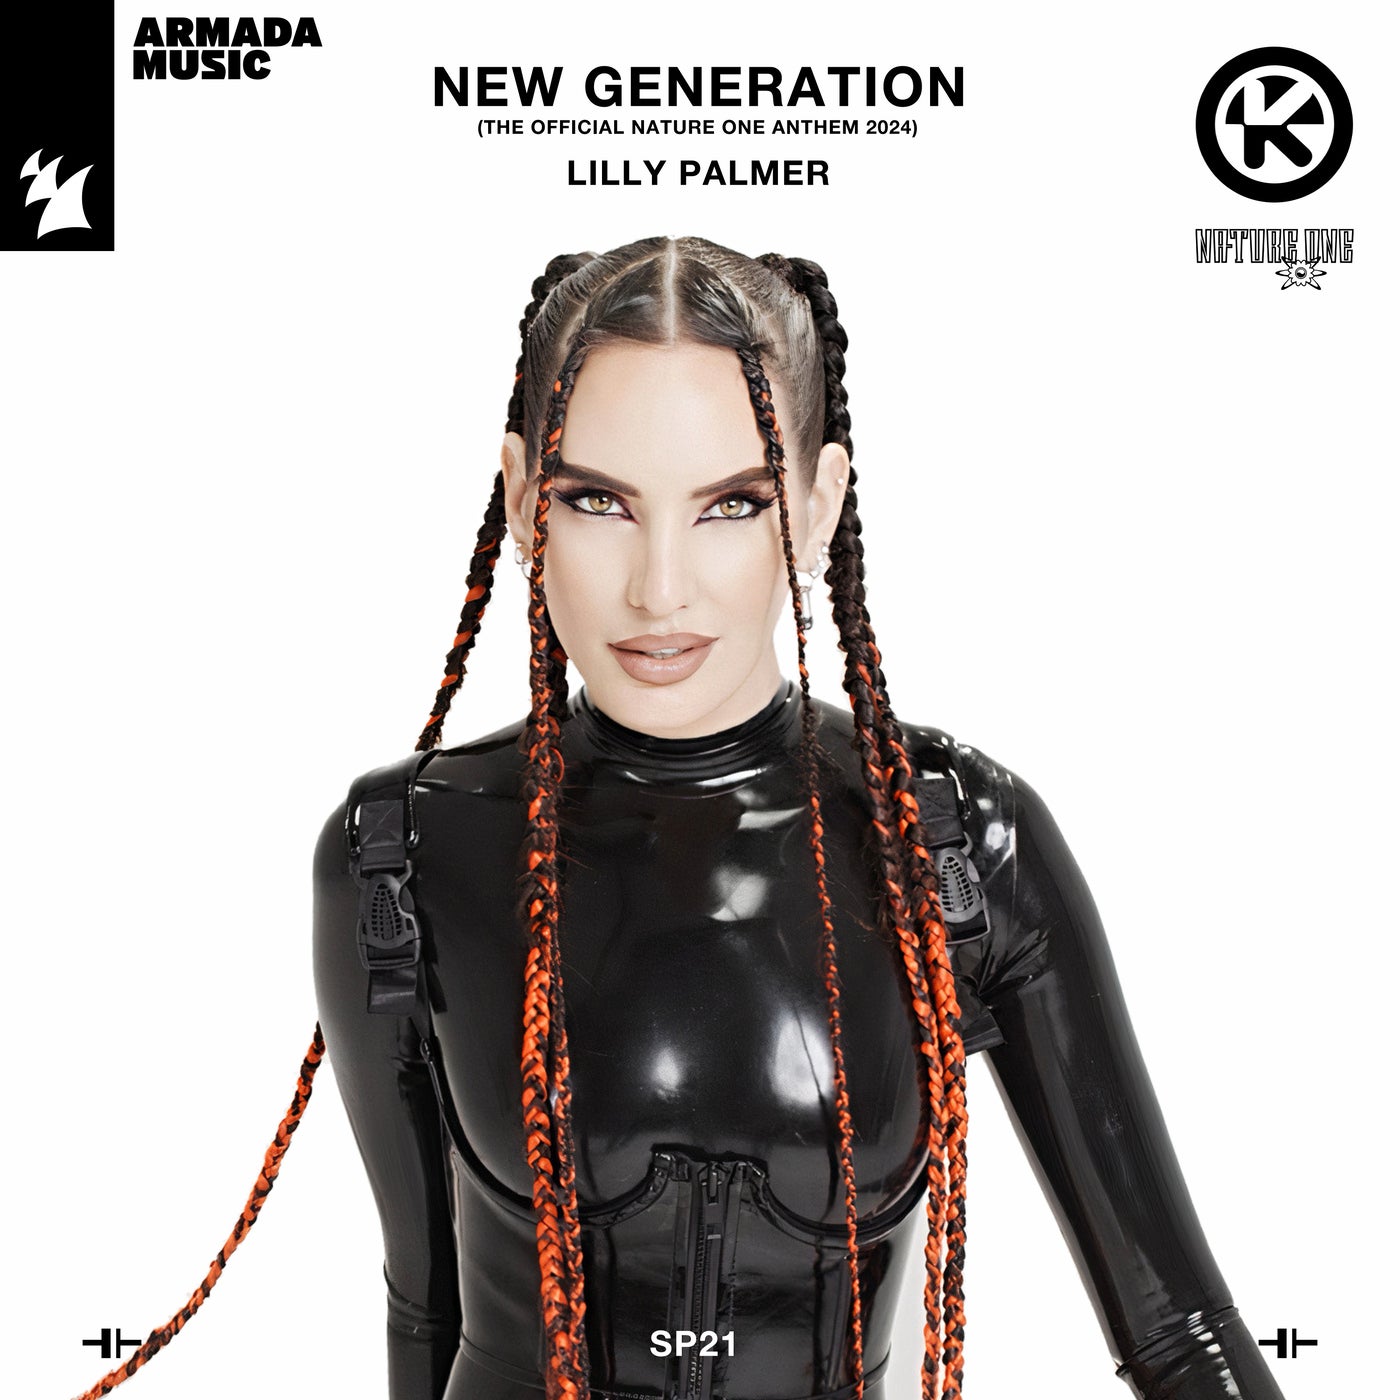 image cover: Lilly Palmer - New Generation EP on Armada Music